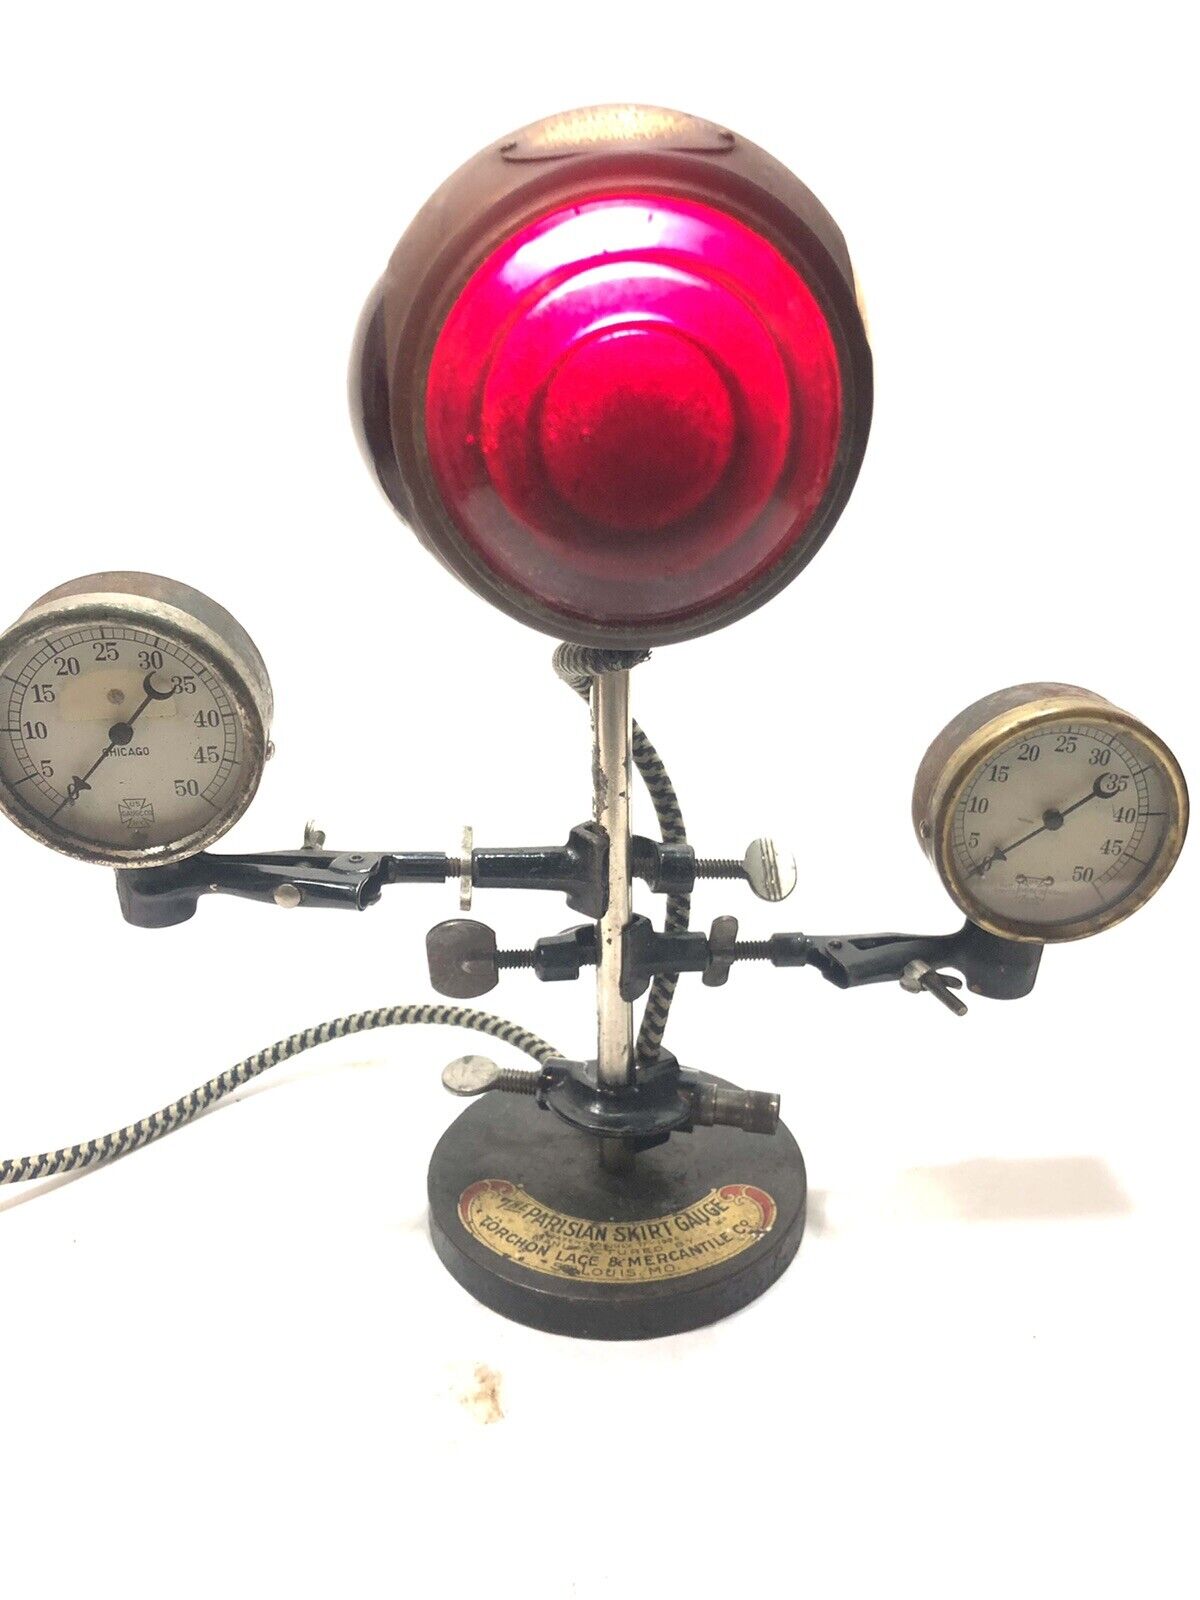 Antique Steampunk Lamp with Dietz Sentinel Tail Light Model 20